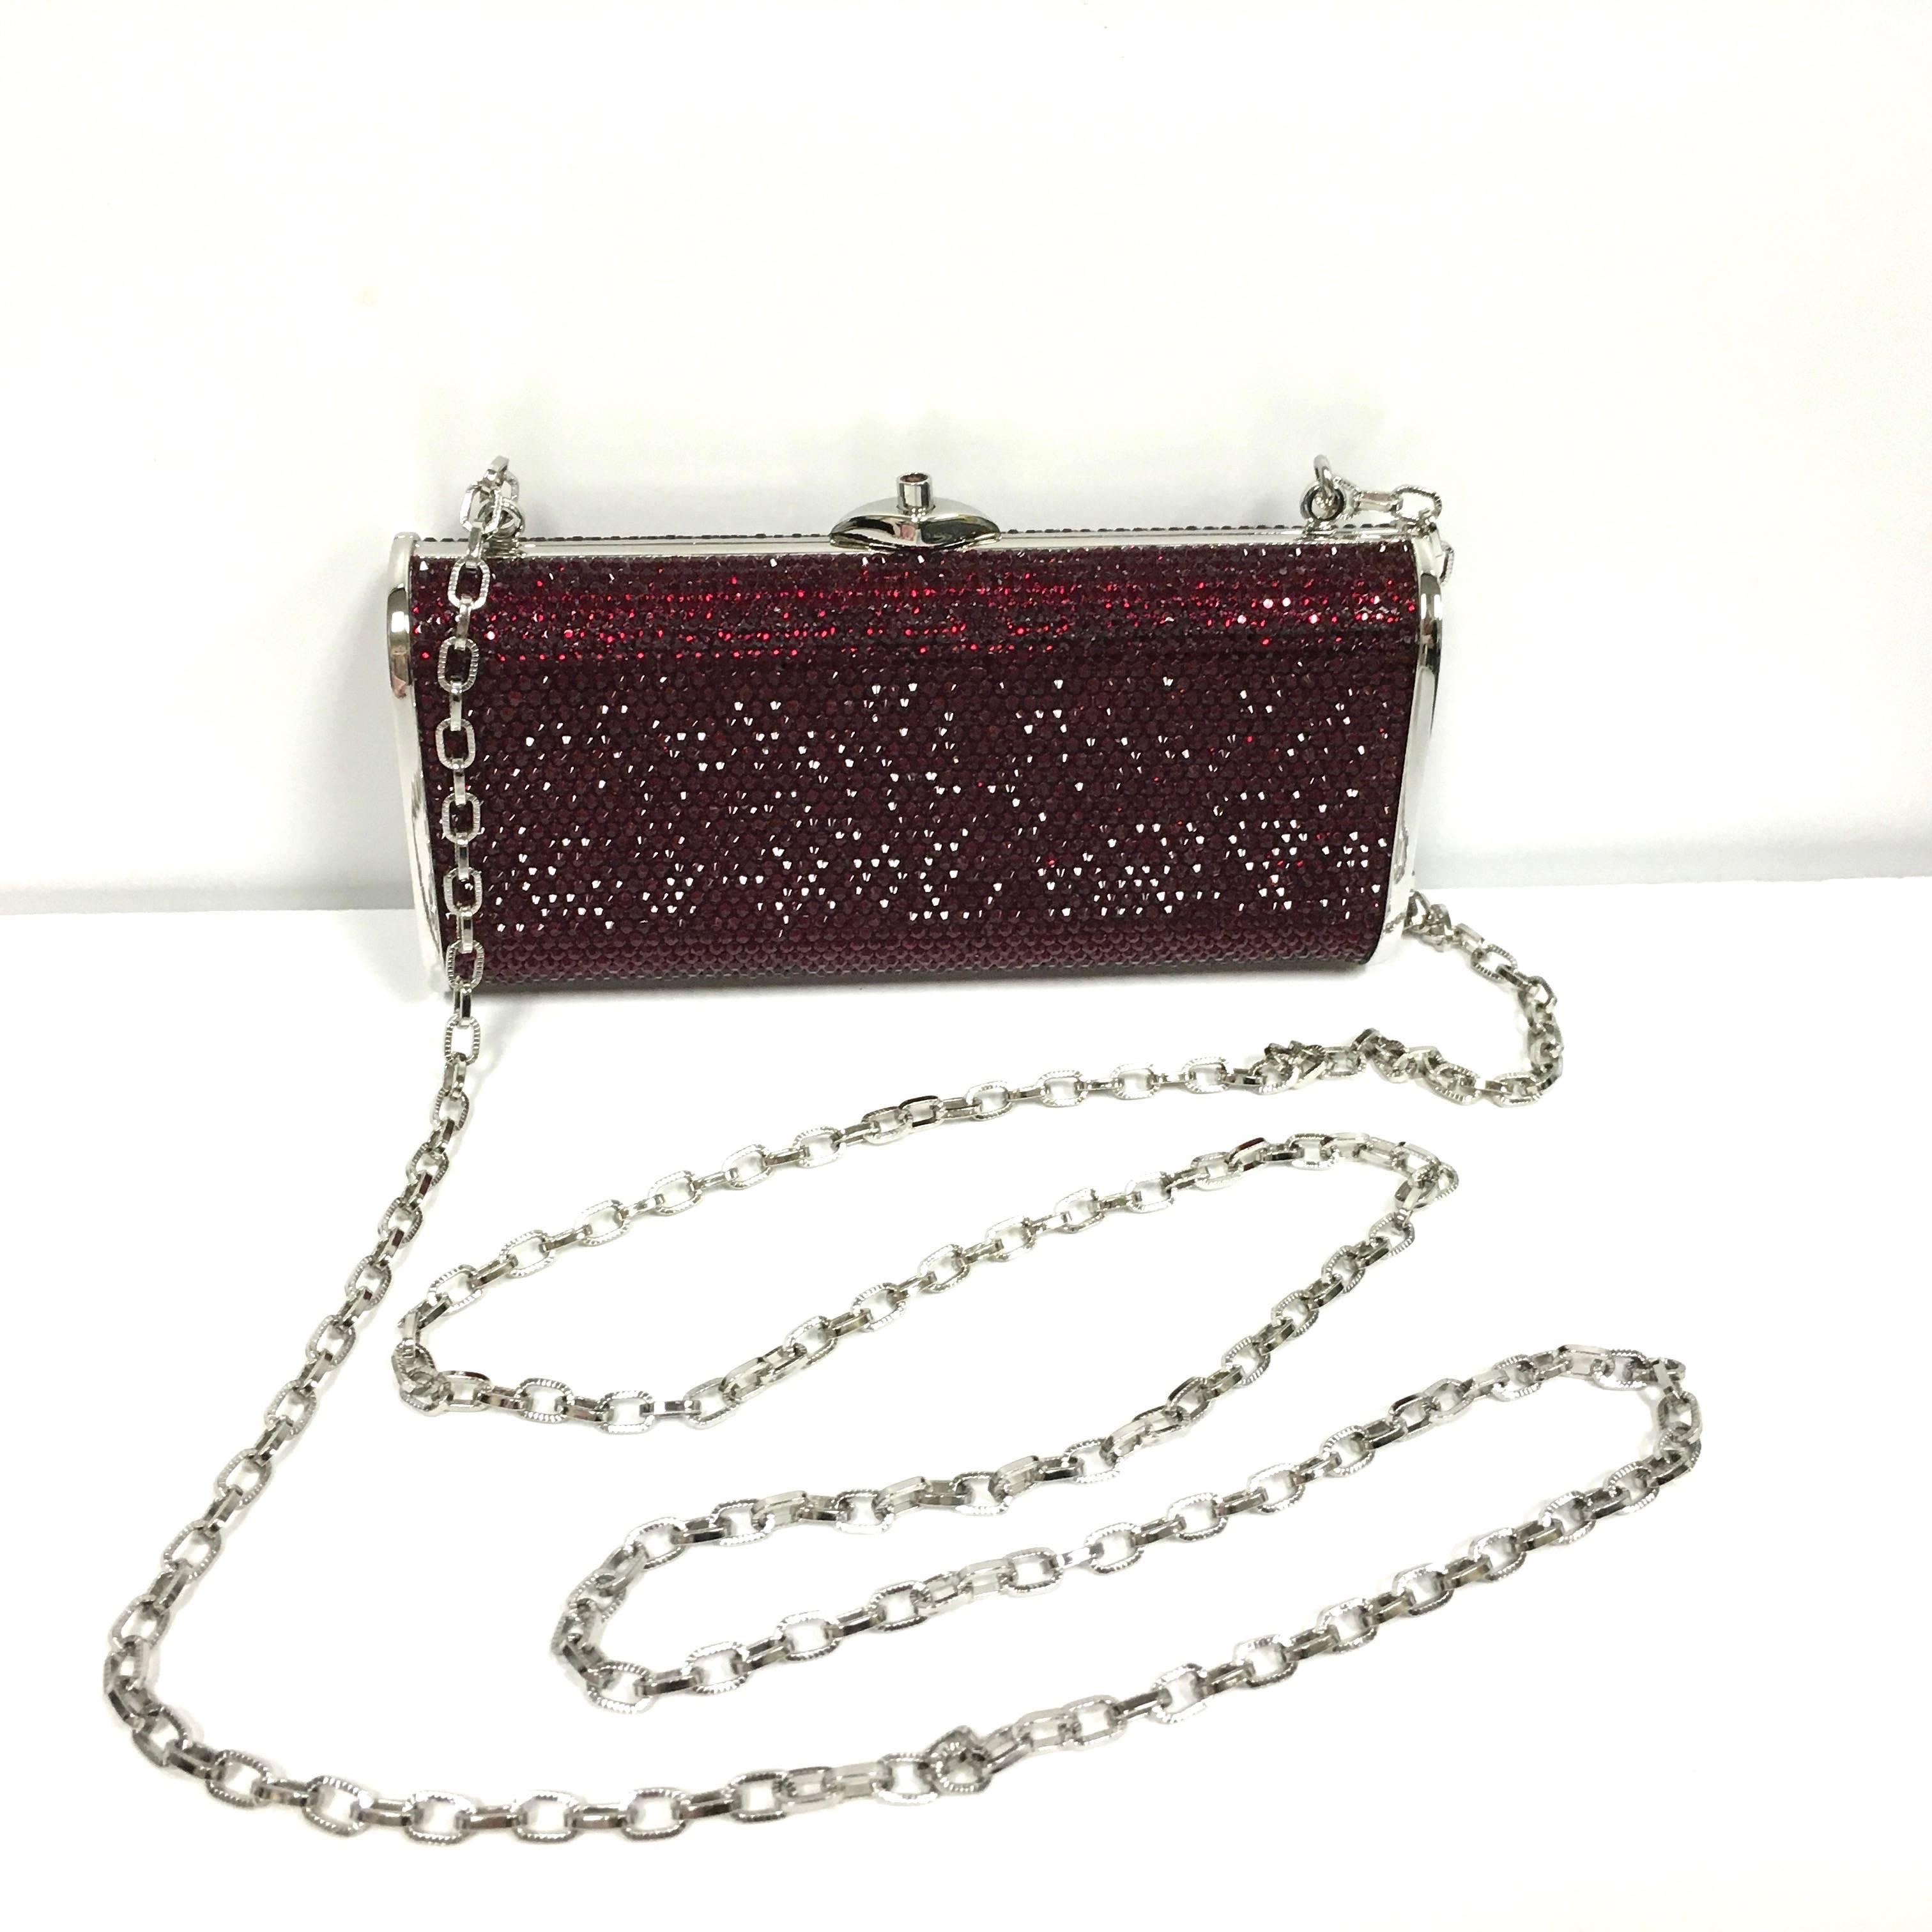 JUDITH LEIBER Silver Framed Red Crystal Minaudiere Clutch Bag
New with Tag Retail: $ 1,395.00
 
Exhibit flawless hand-craftsmanship with this authentic Judith Leiber red crystal studded evening clutch by your side. In this captivating piece,